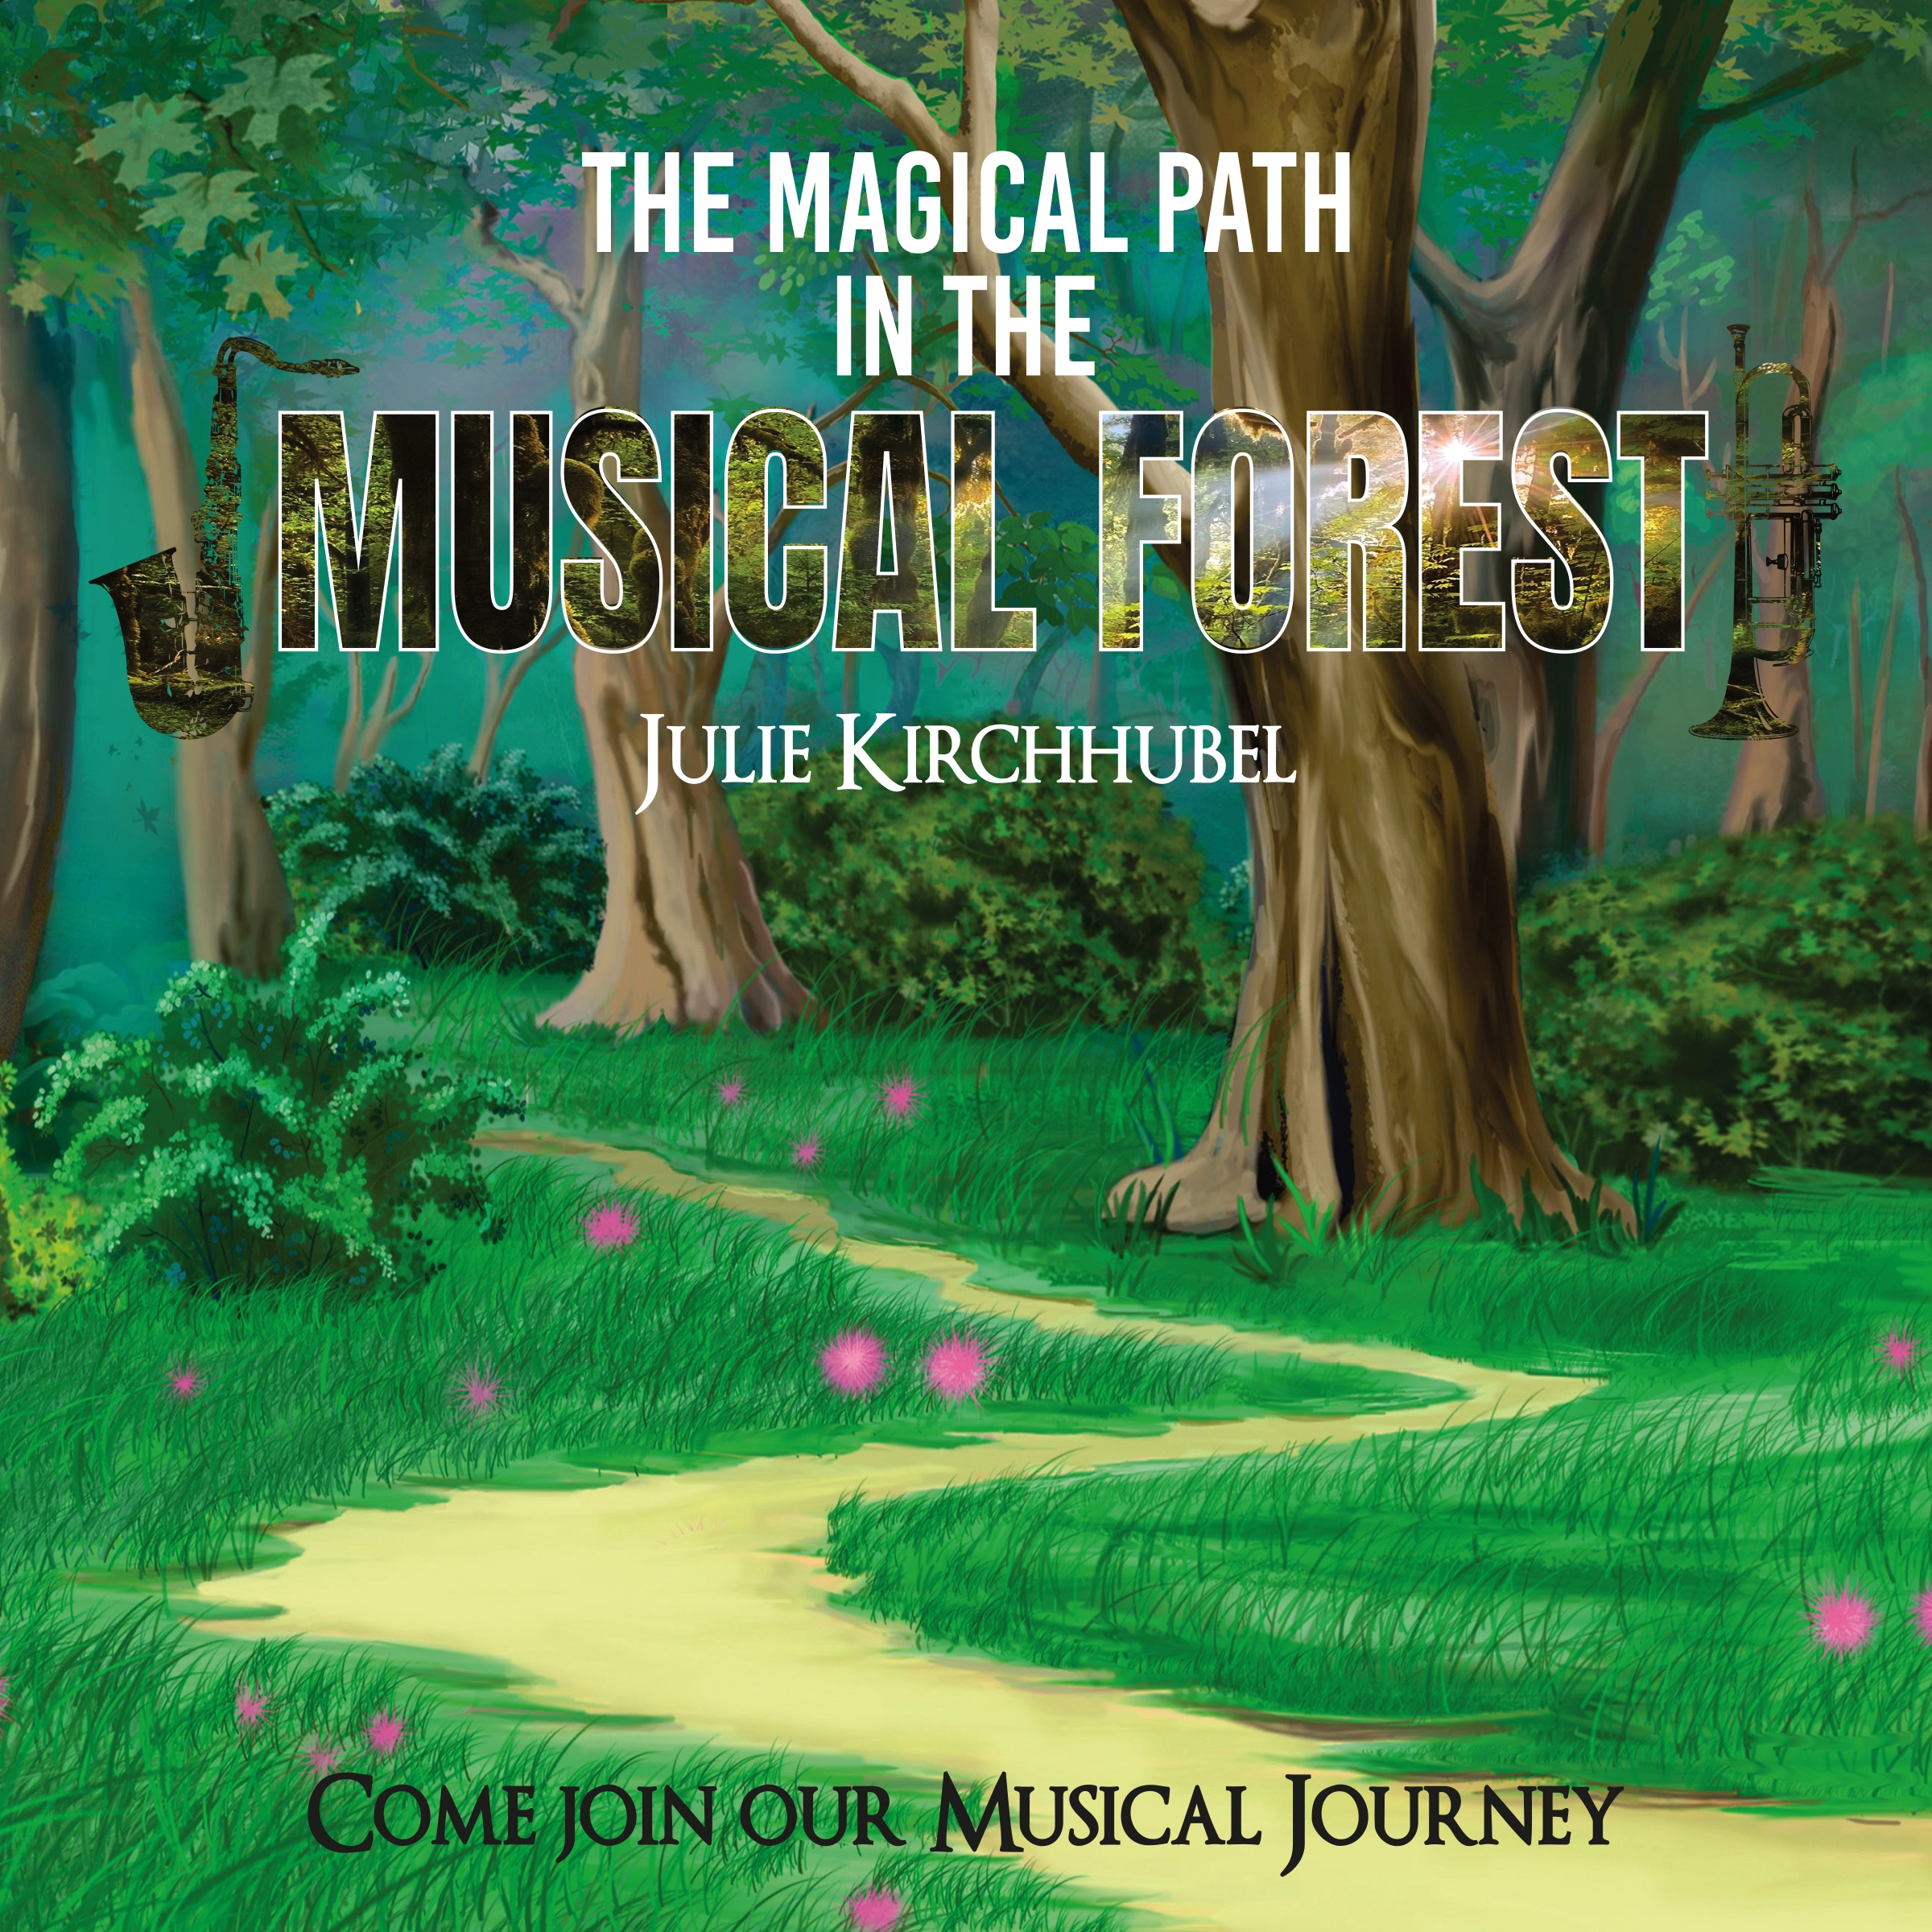 The Magical Path In The Musical Forest by Julie Kirchhubel Audiobook